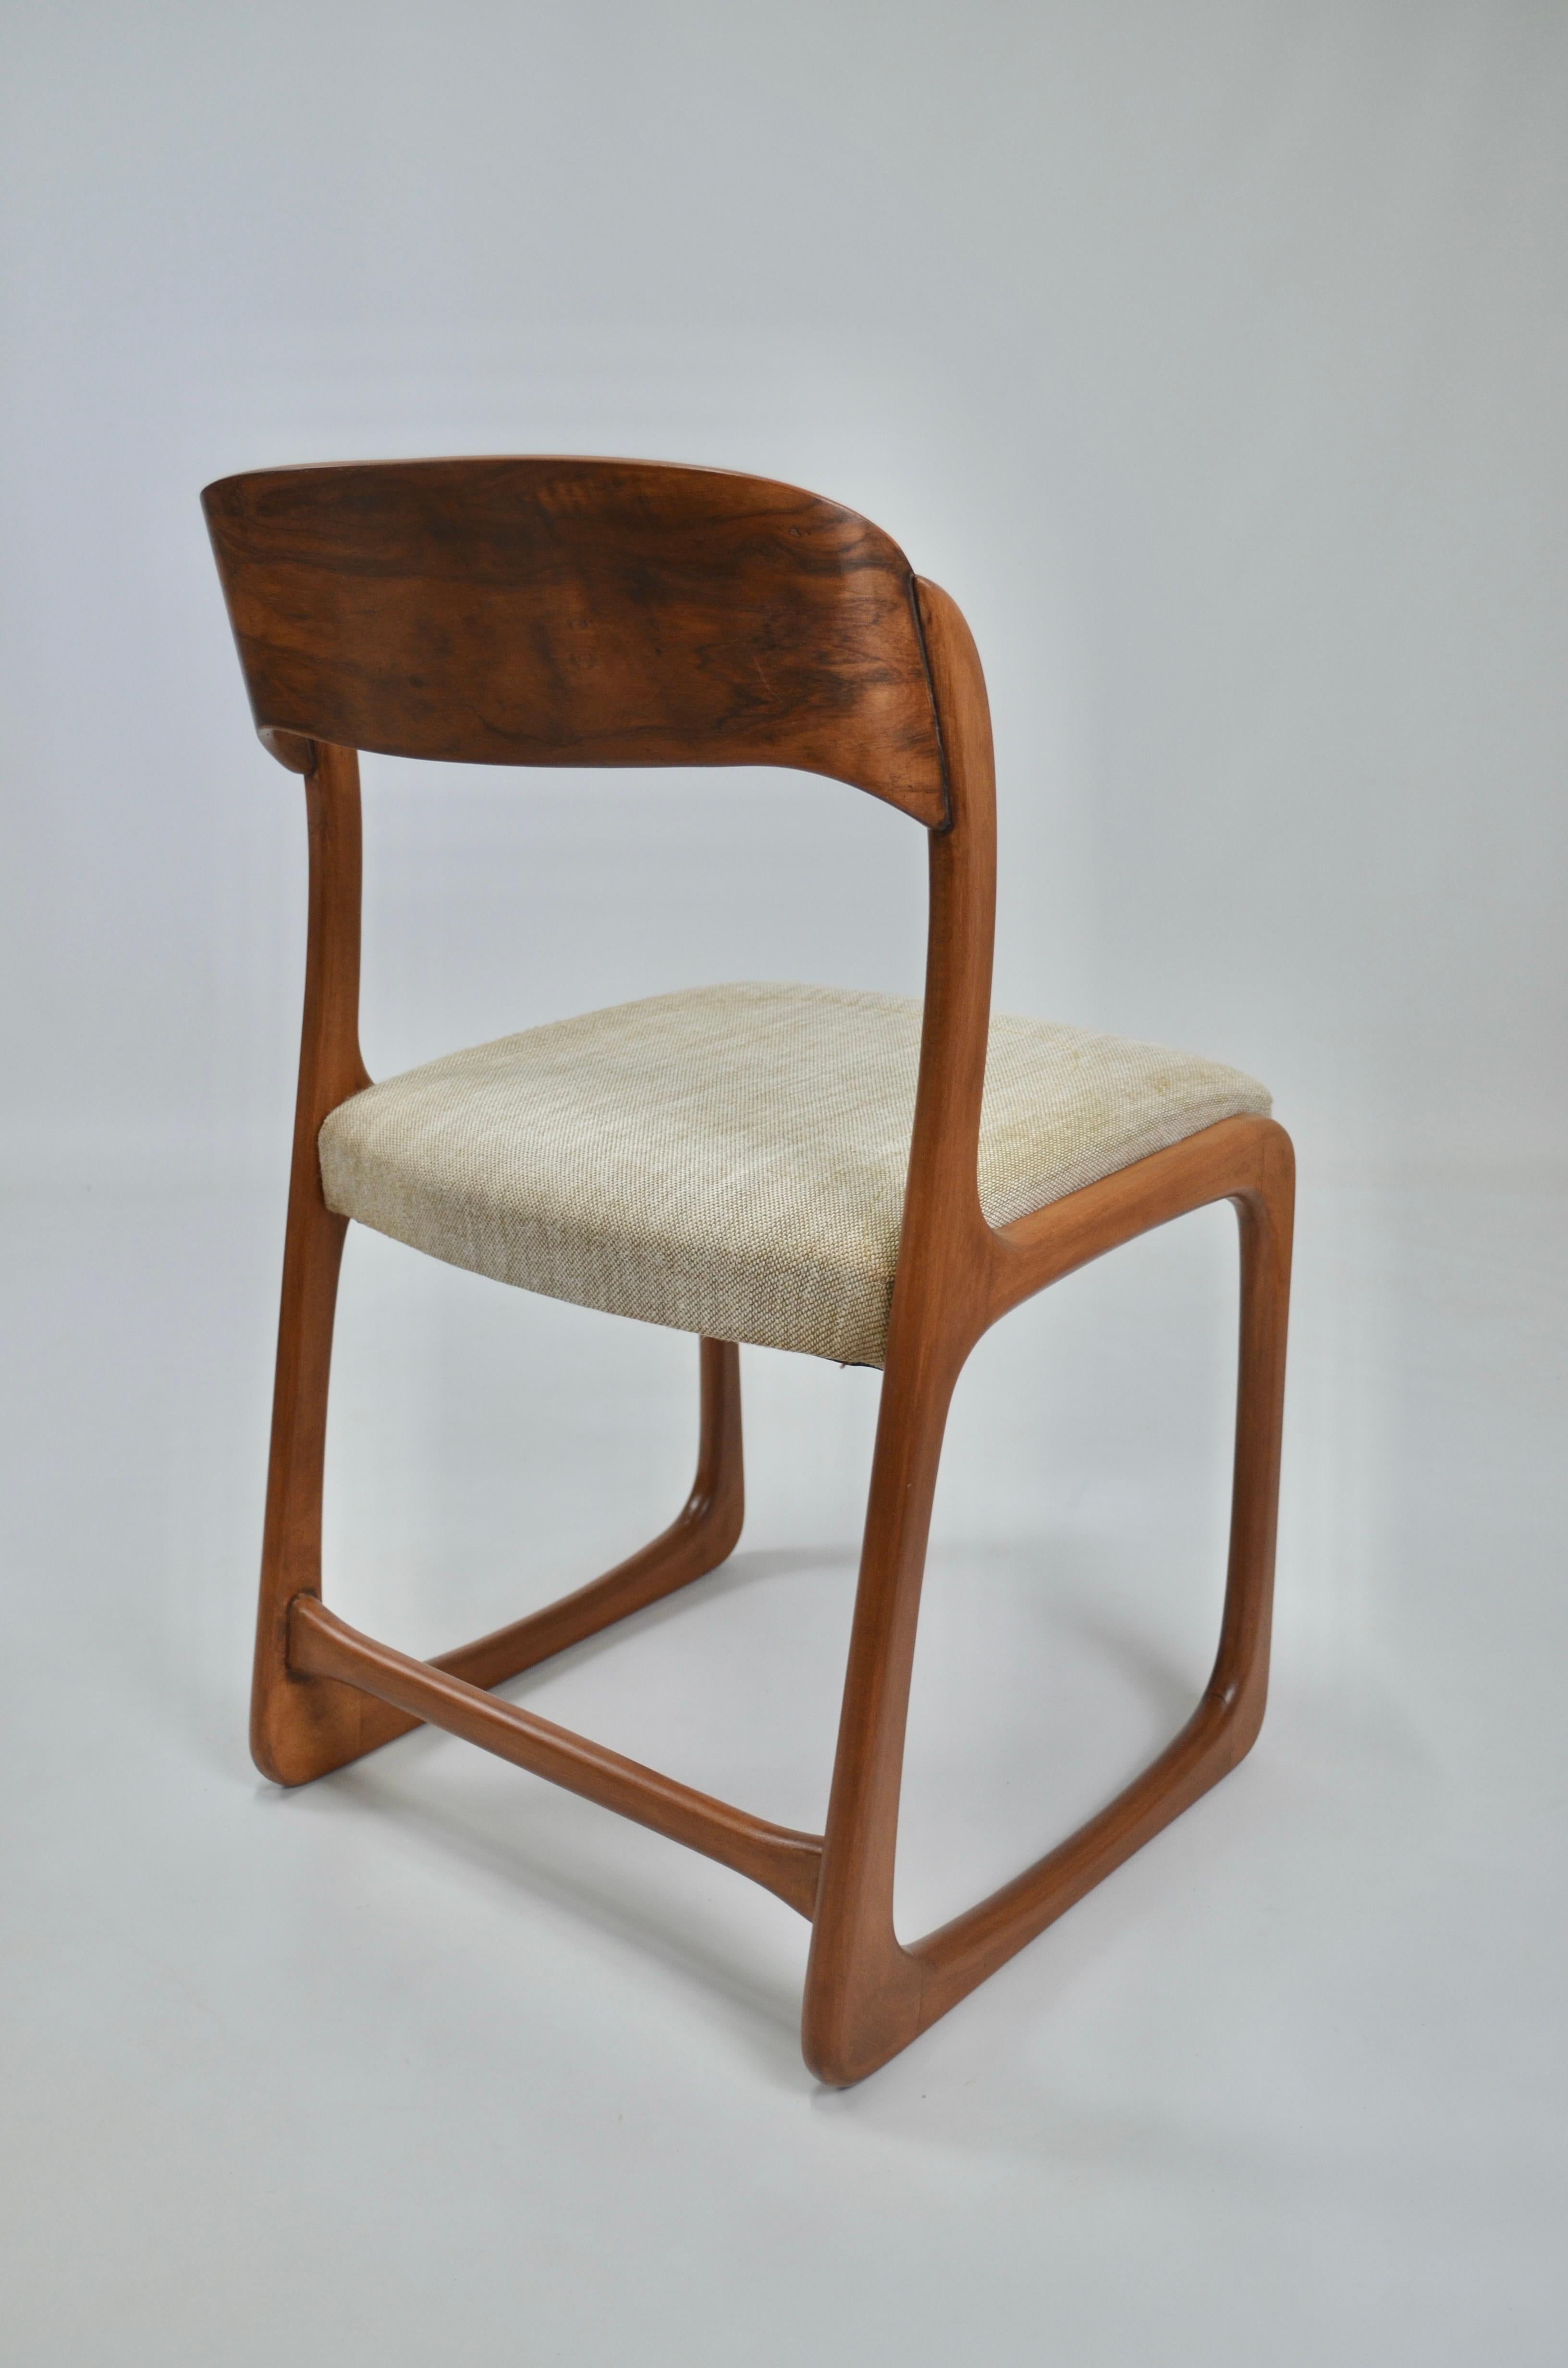 Vintage French Traineau or Sleigh Dining Chairs, Baumann, France, 60s For Sale 10